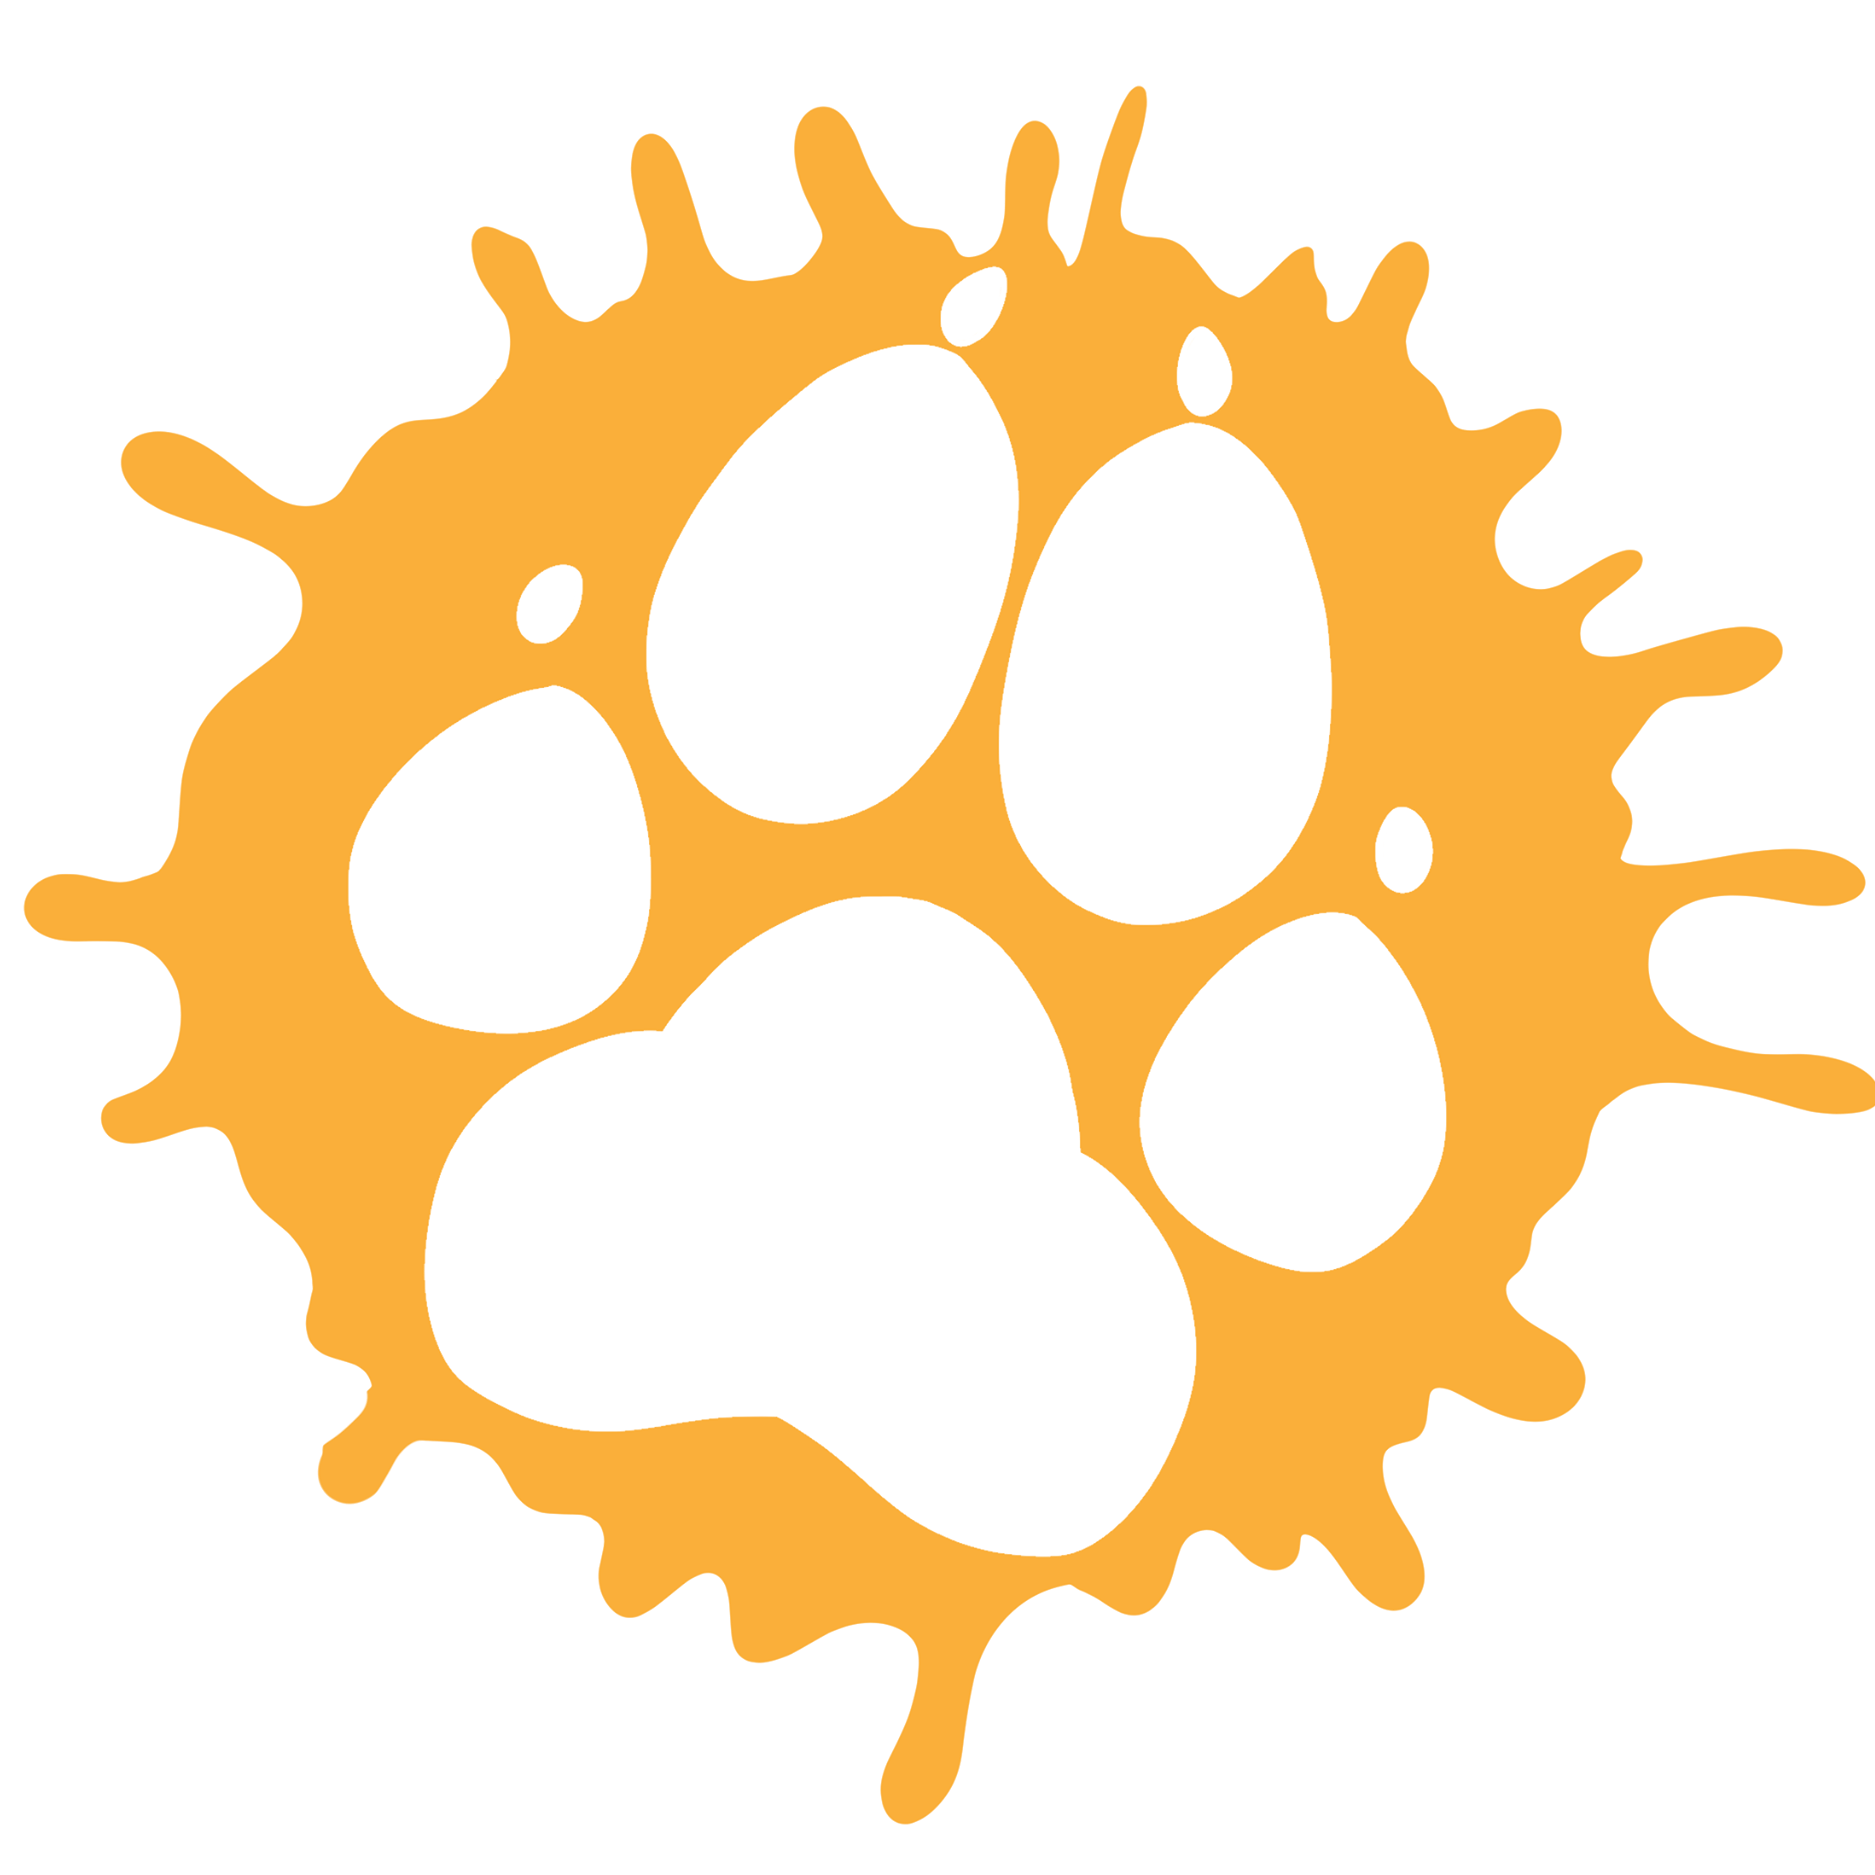 The Furaffinity logo, a white pawprint surrounded by an orange splat pattern.